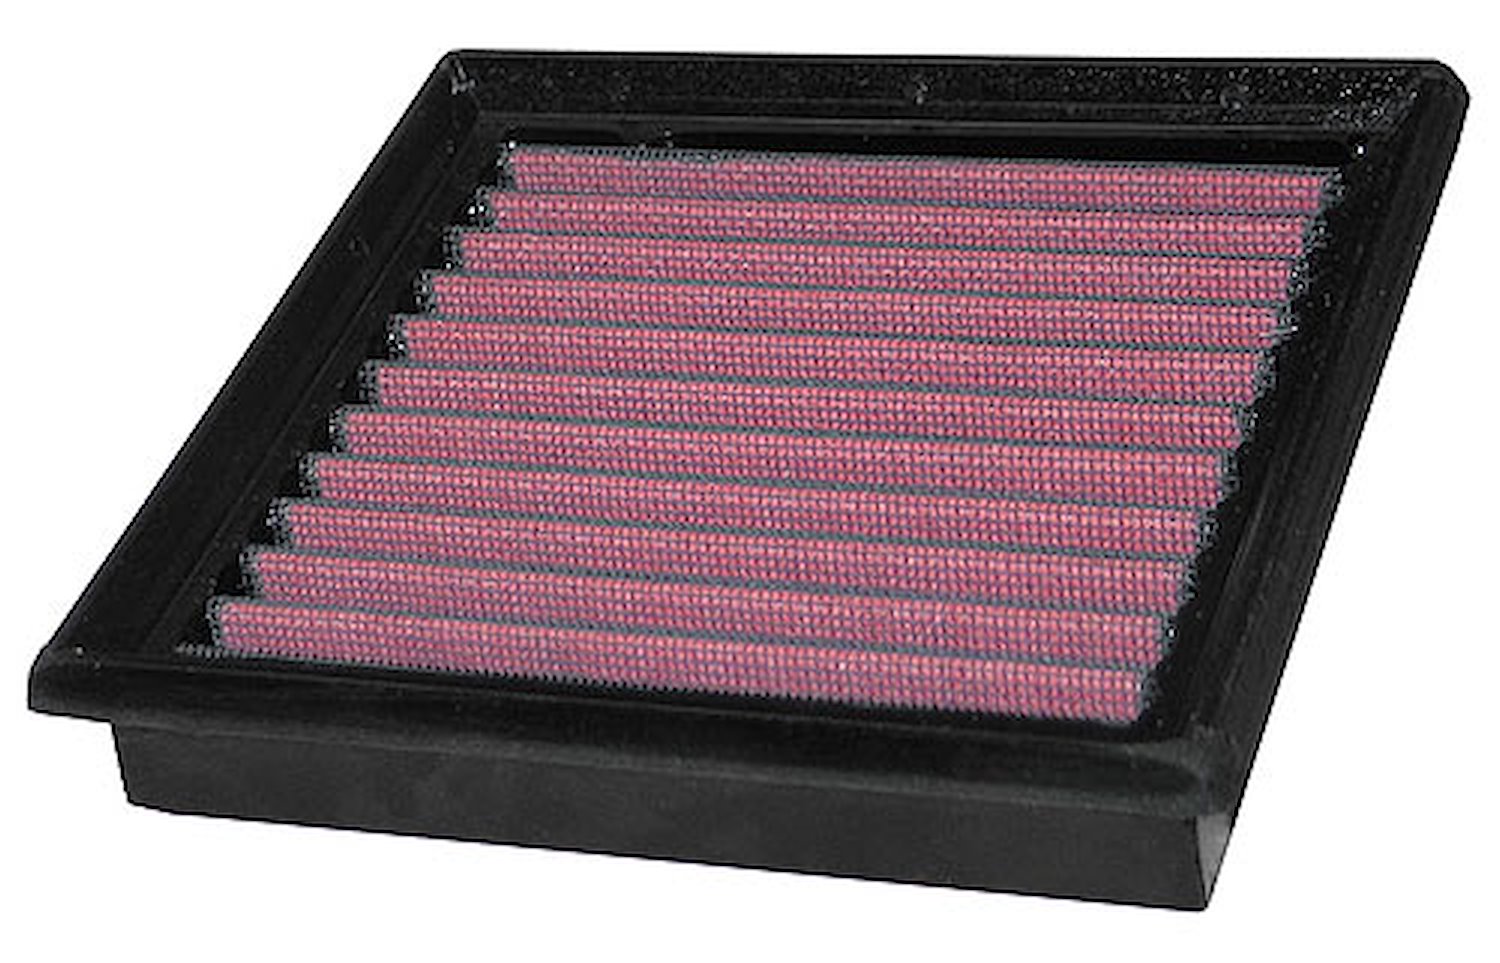 K&N s replacement air filters are designed to